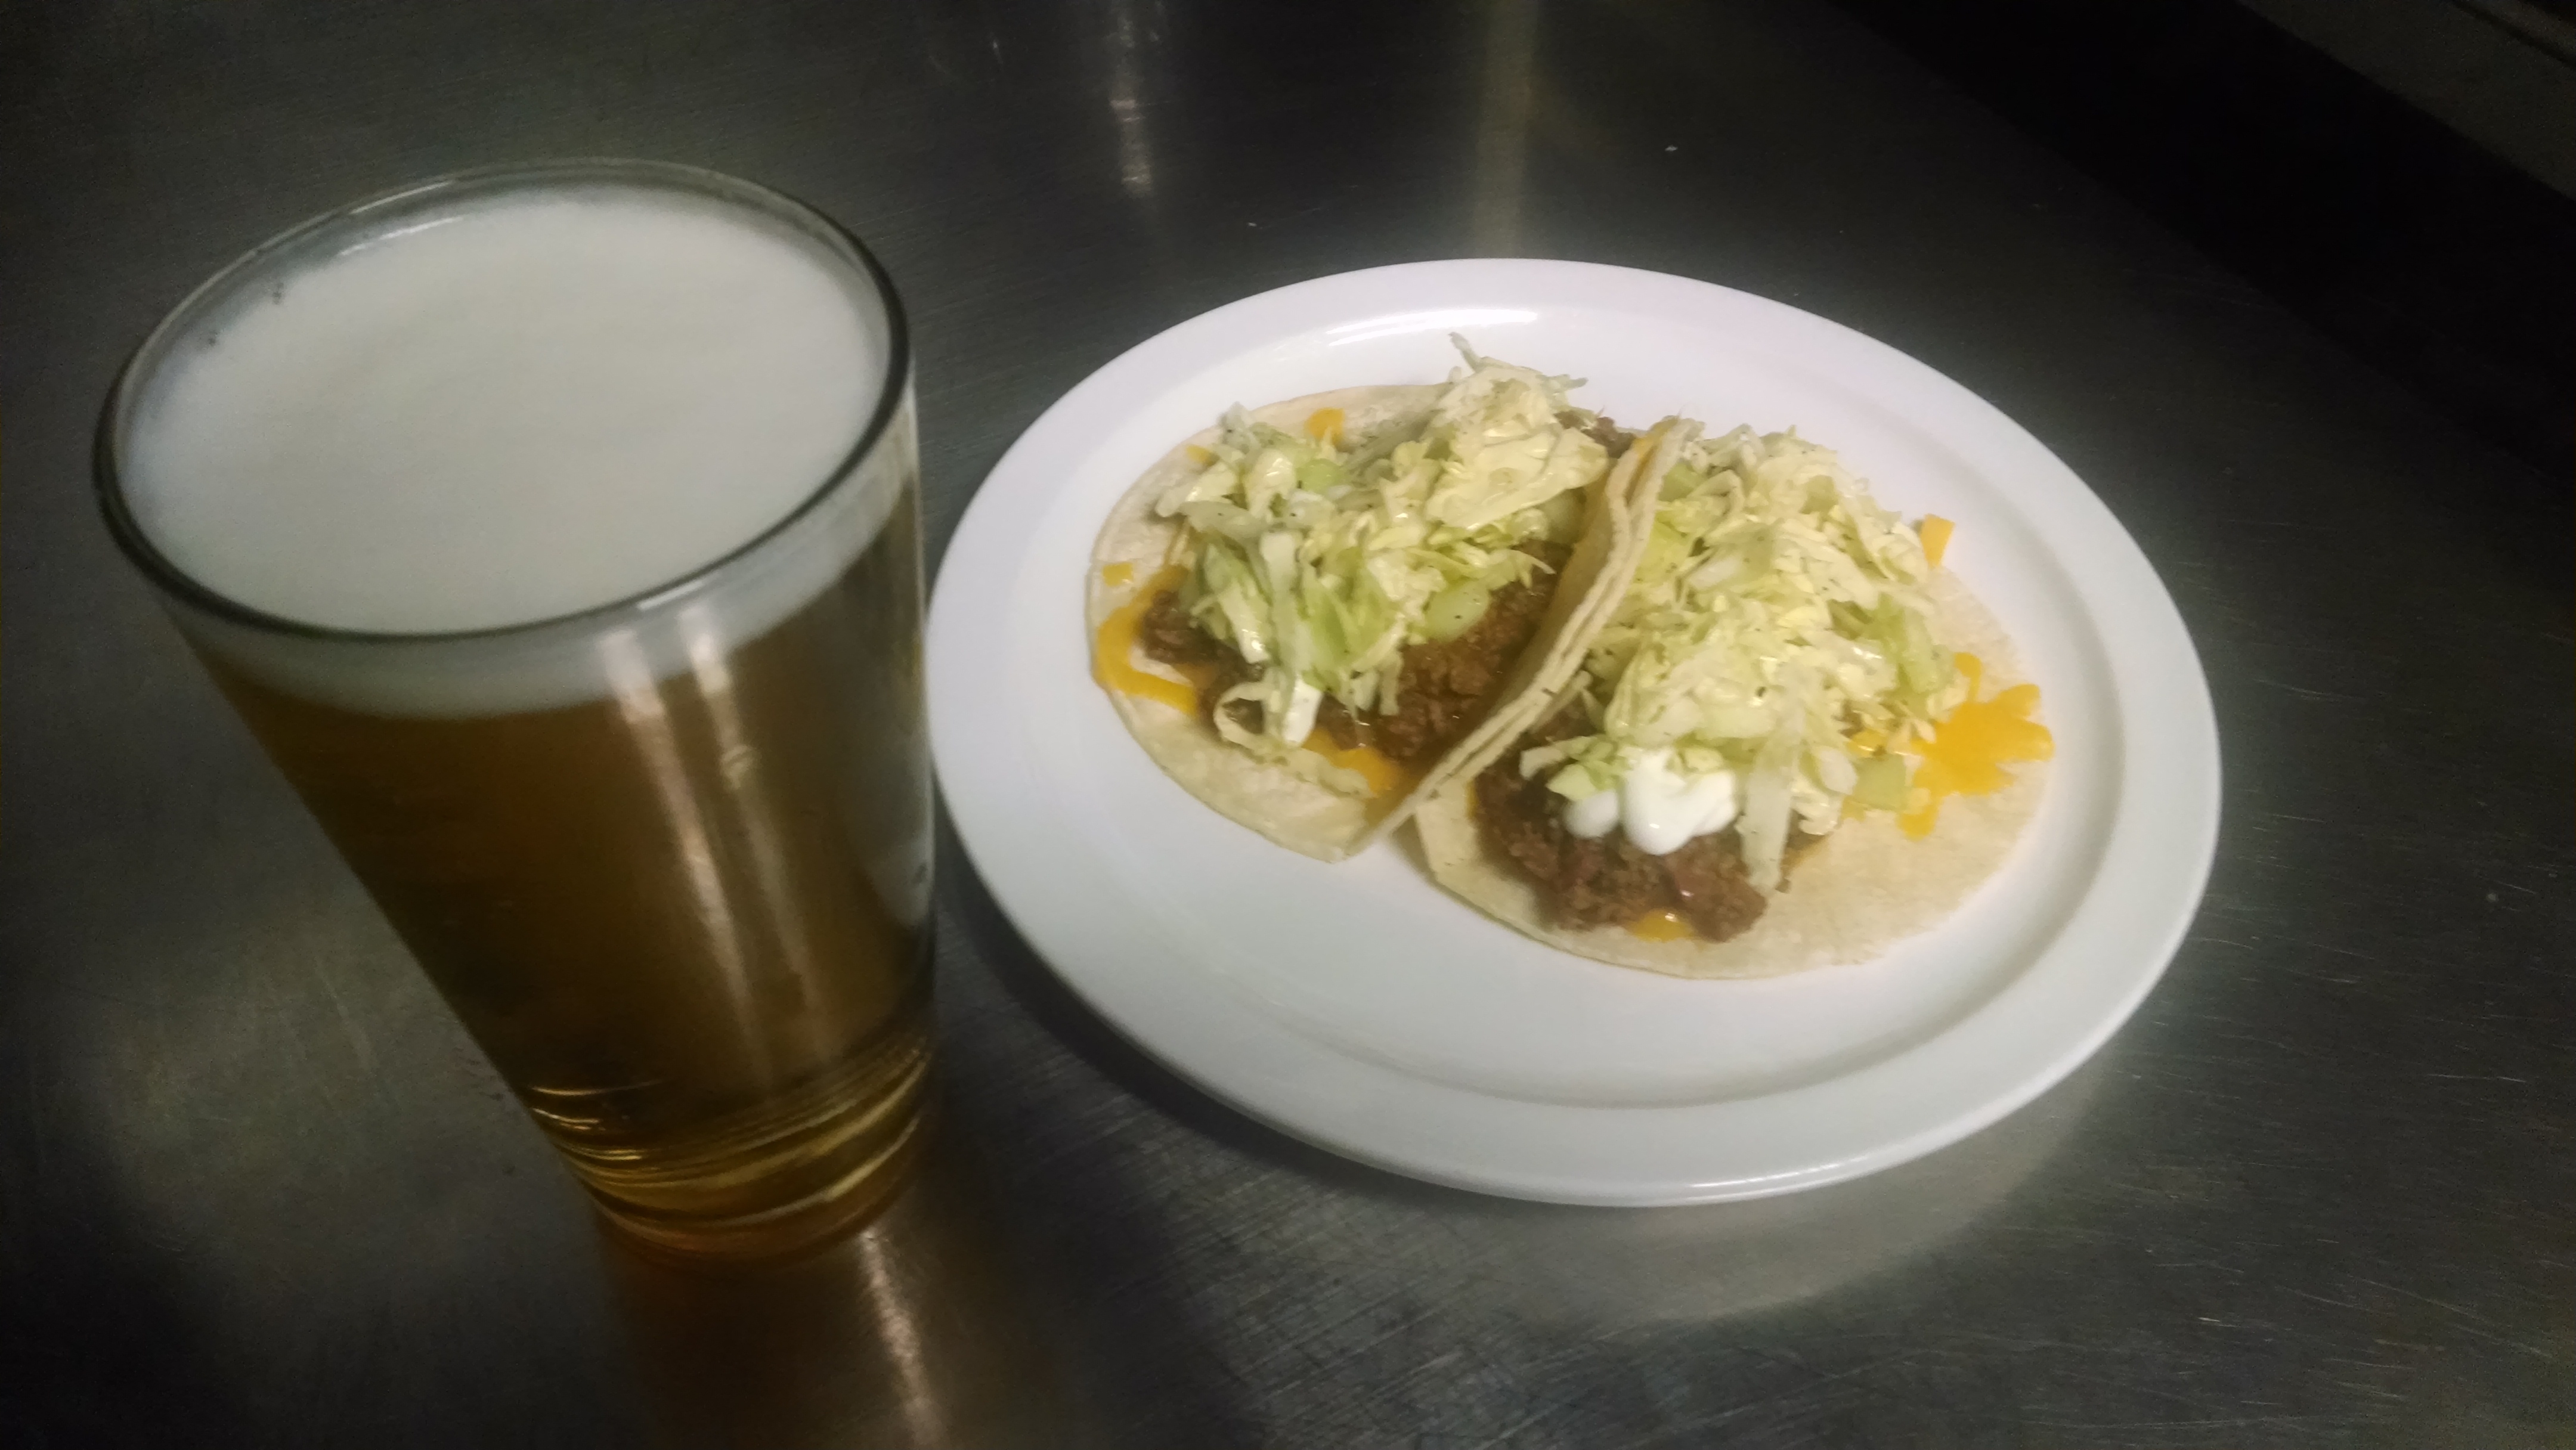 Taco Tuesday! Every Tuesday join us for 2 veggies tacos and pabst for $5, and $1 pbr's after 8pm! Bare Bones Cafe & Bar Portland (503)719-7128